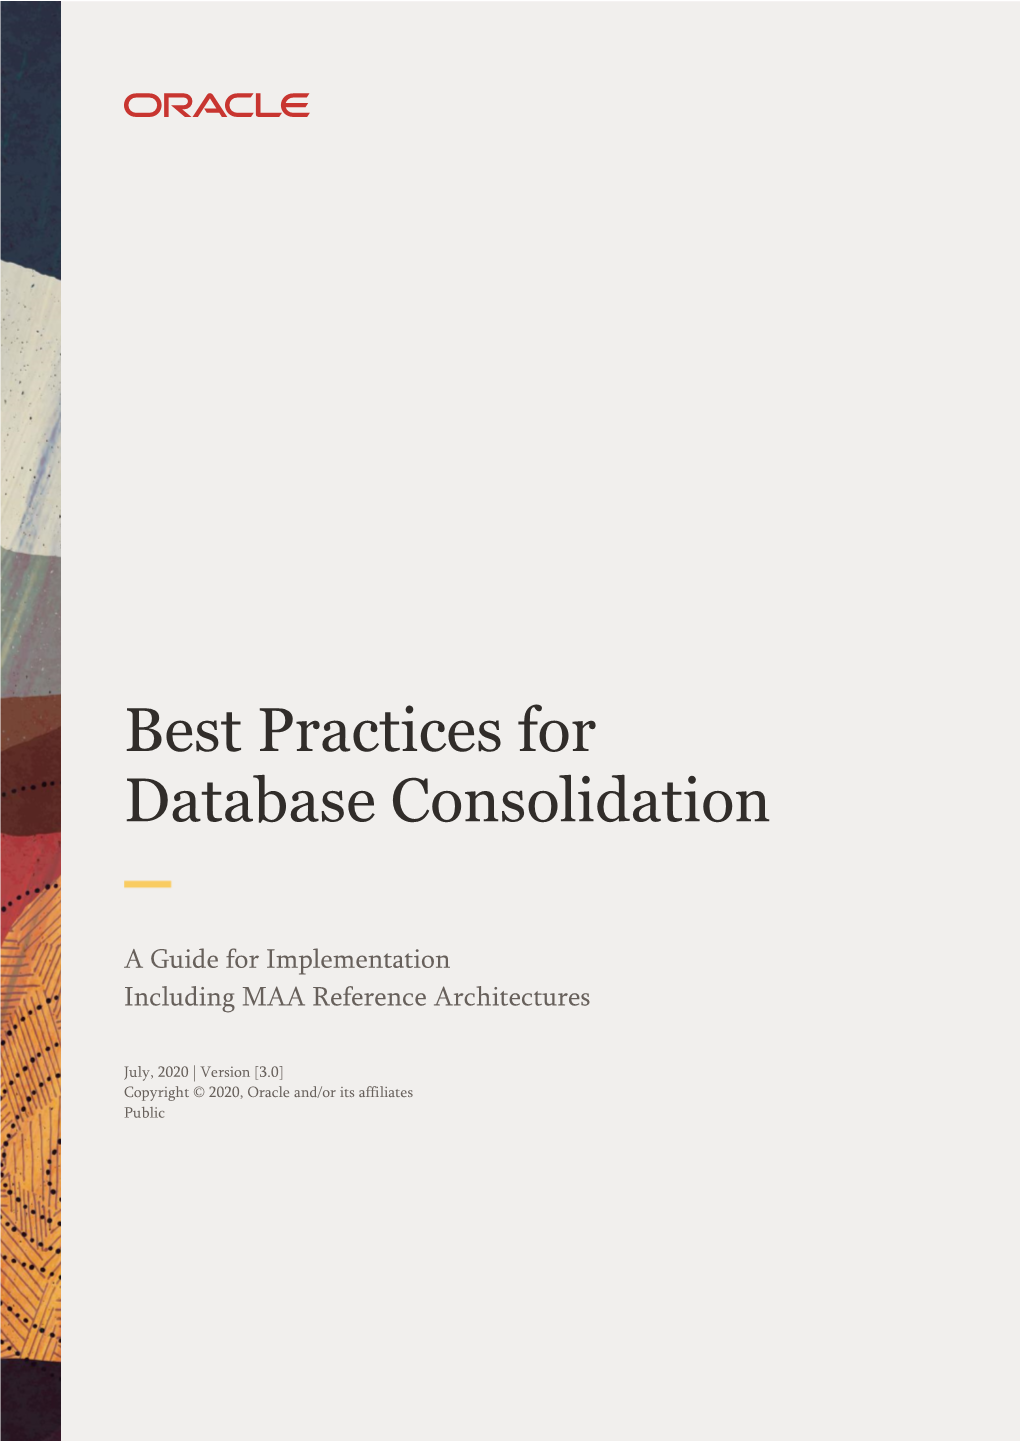 Best Practices for Database Consolidation